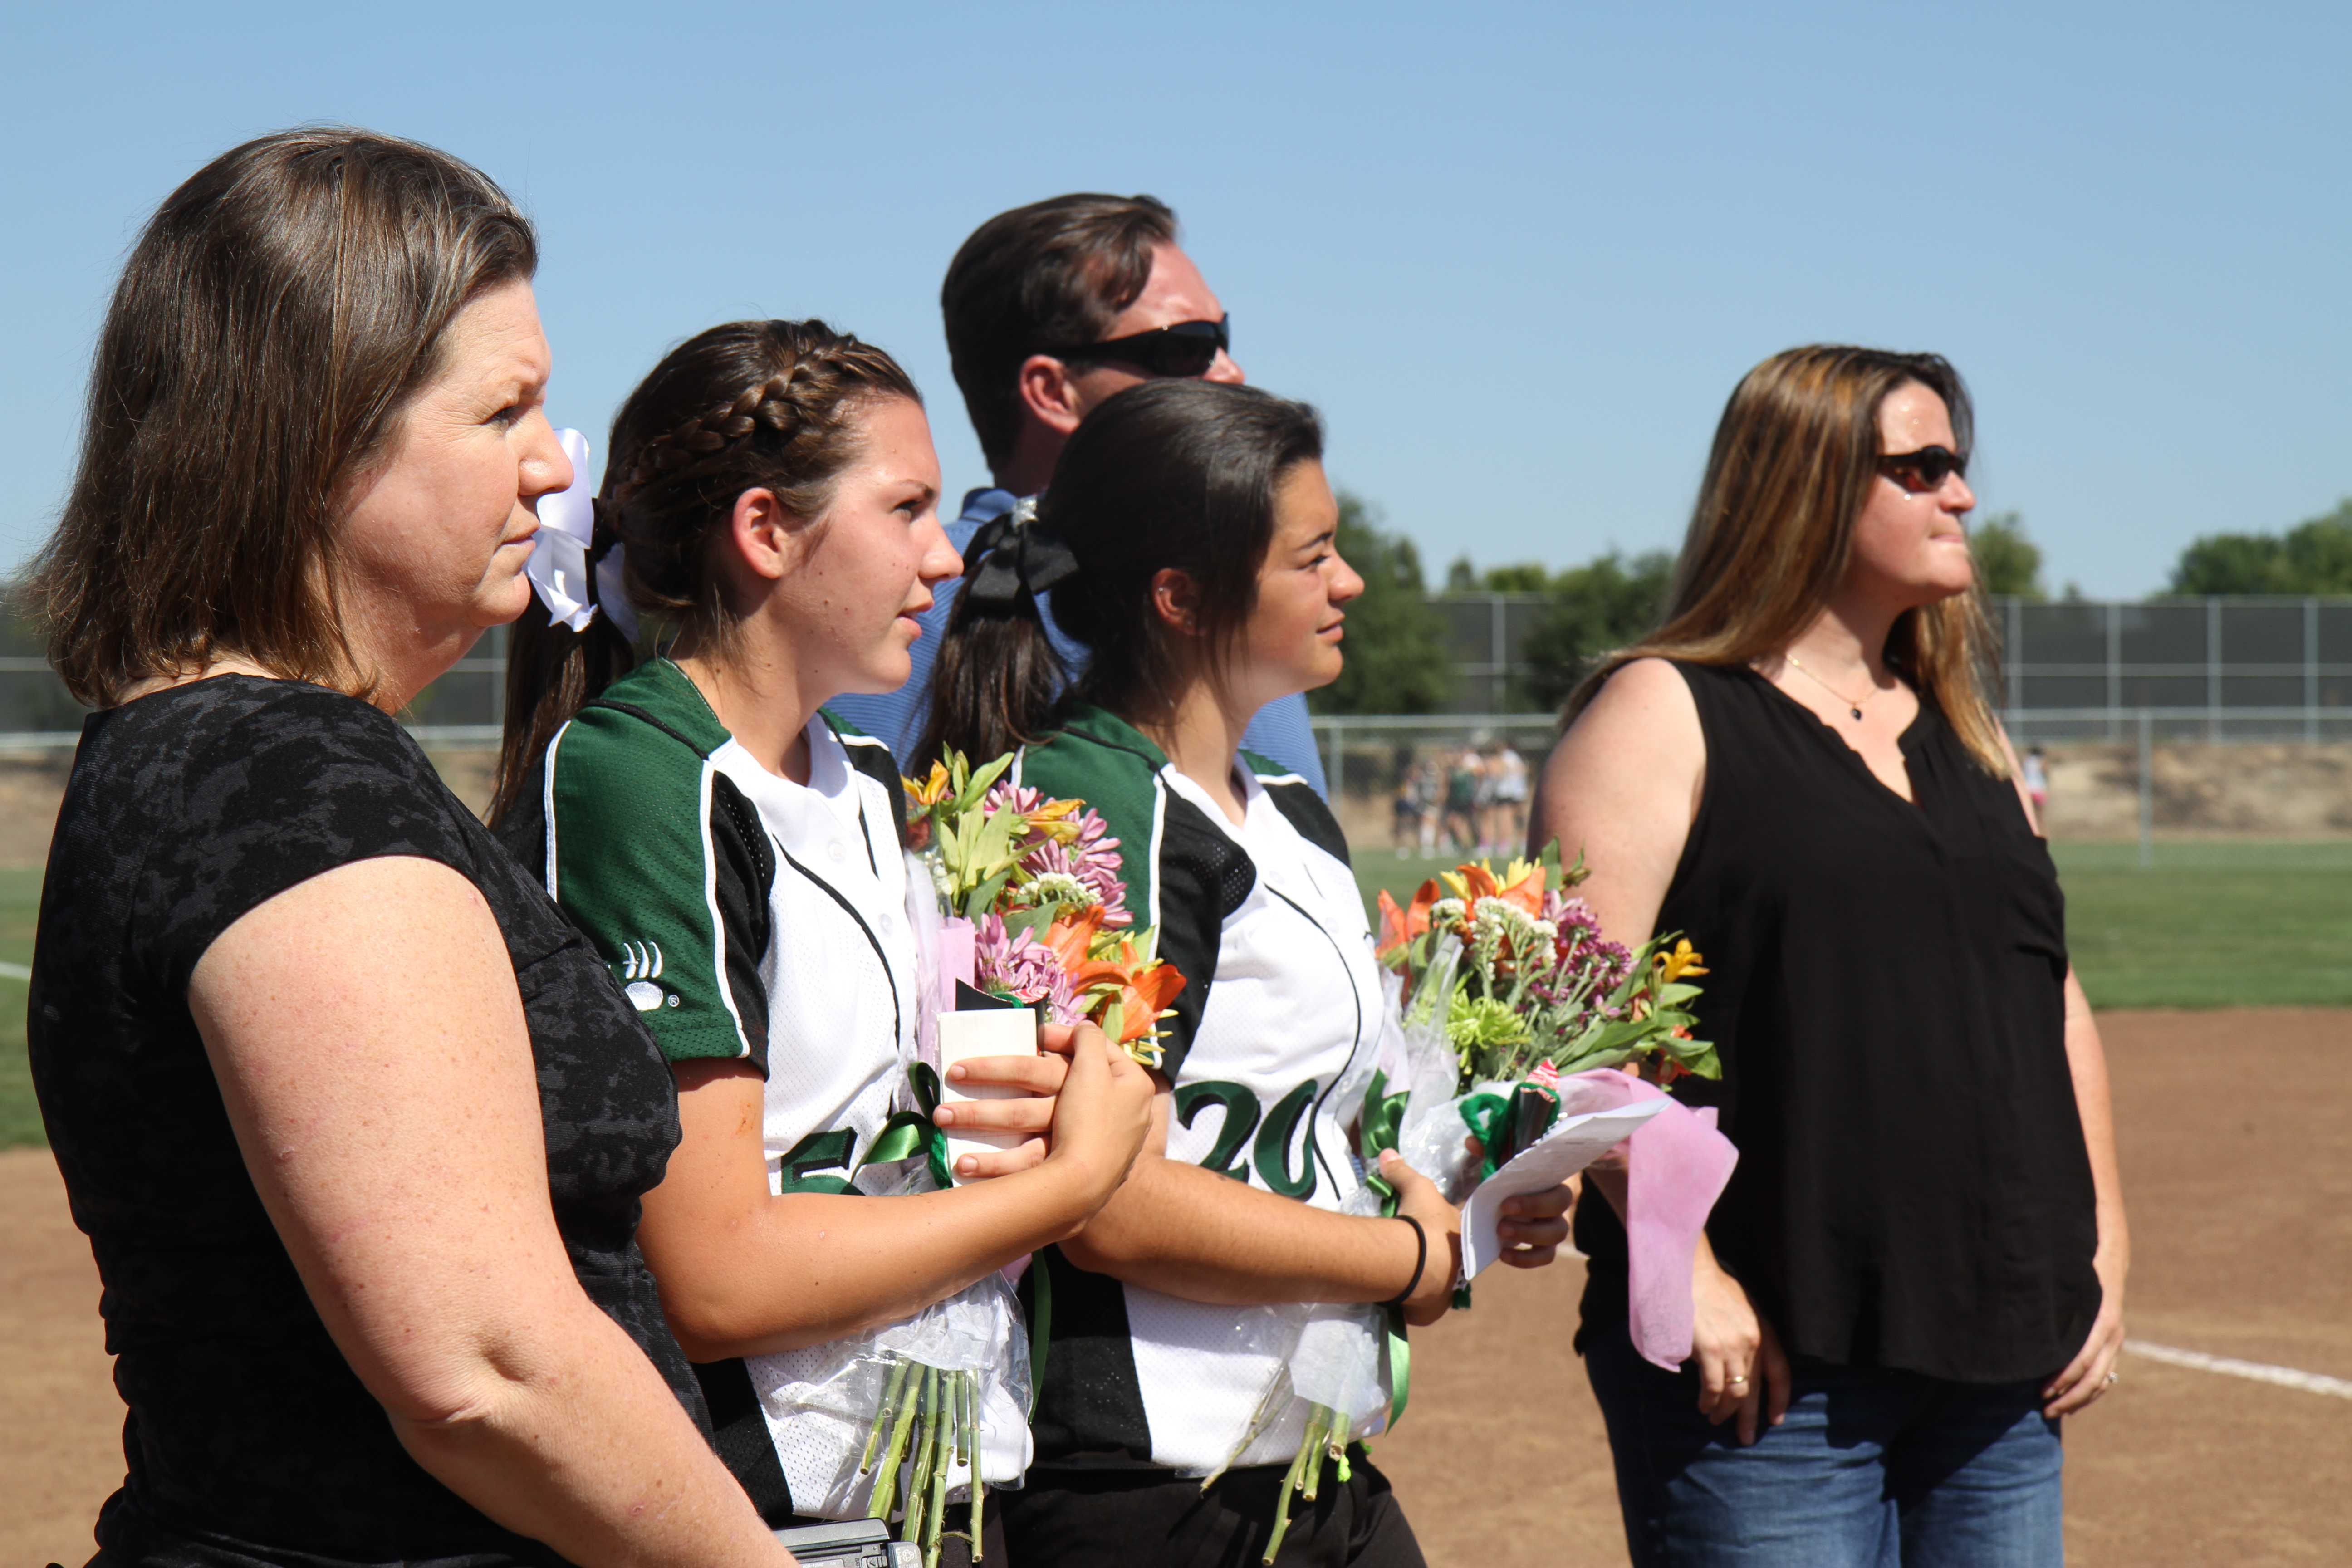 LAST GAME Because it’s the seniors’ last home softball game, seniors Ashleigh Berg and Ashley Martin receive flowers and a special speech from their coaches. The seniors’ parents and grandparents come to support the lady grizzlies at their last home game. For the underclassmen on the team along with the coaches, it was a very emotional experience. “Watching this happen to the previous seniors when we were juniors/underclassmen  was always sad, but now that we are seniors going through this it’s even more sad because I’ve been with these coaches for the past three years,” Berg said. Photo by Janelle Cruz